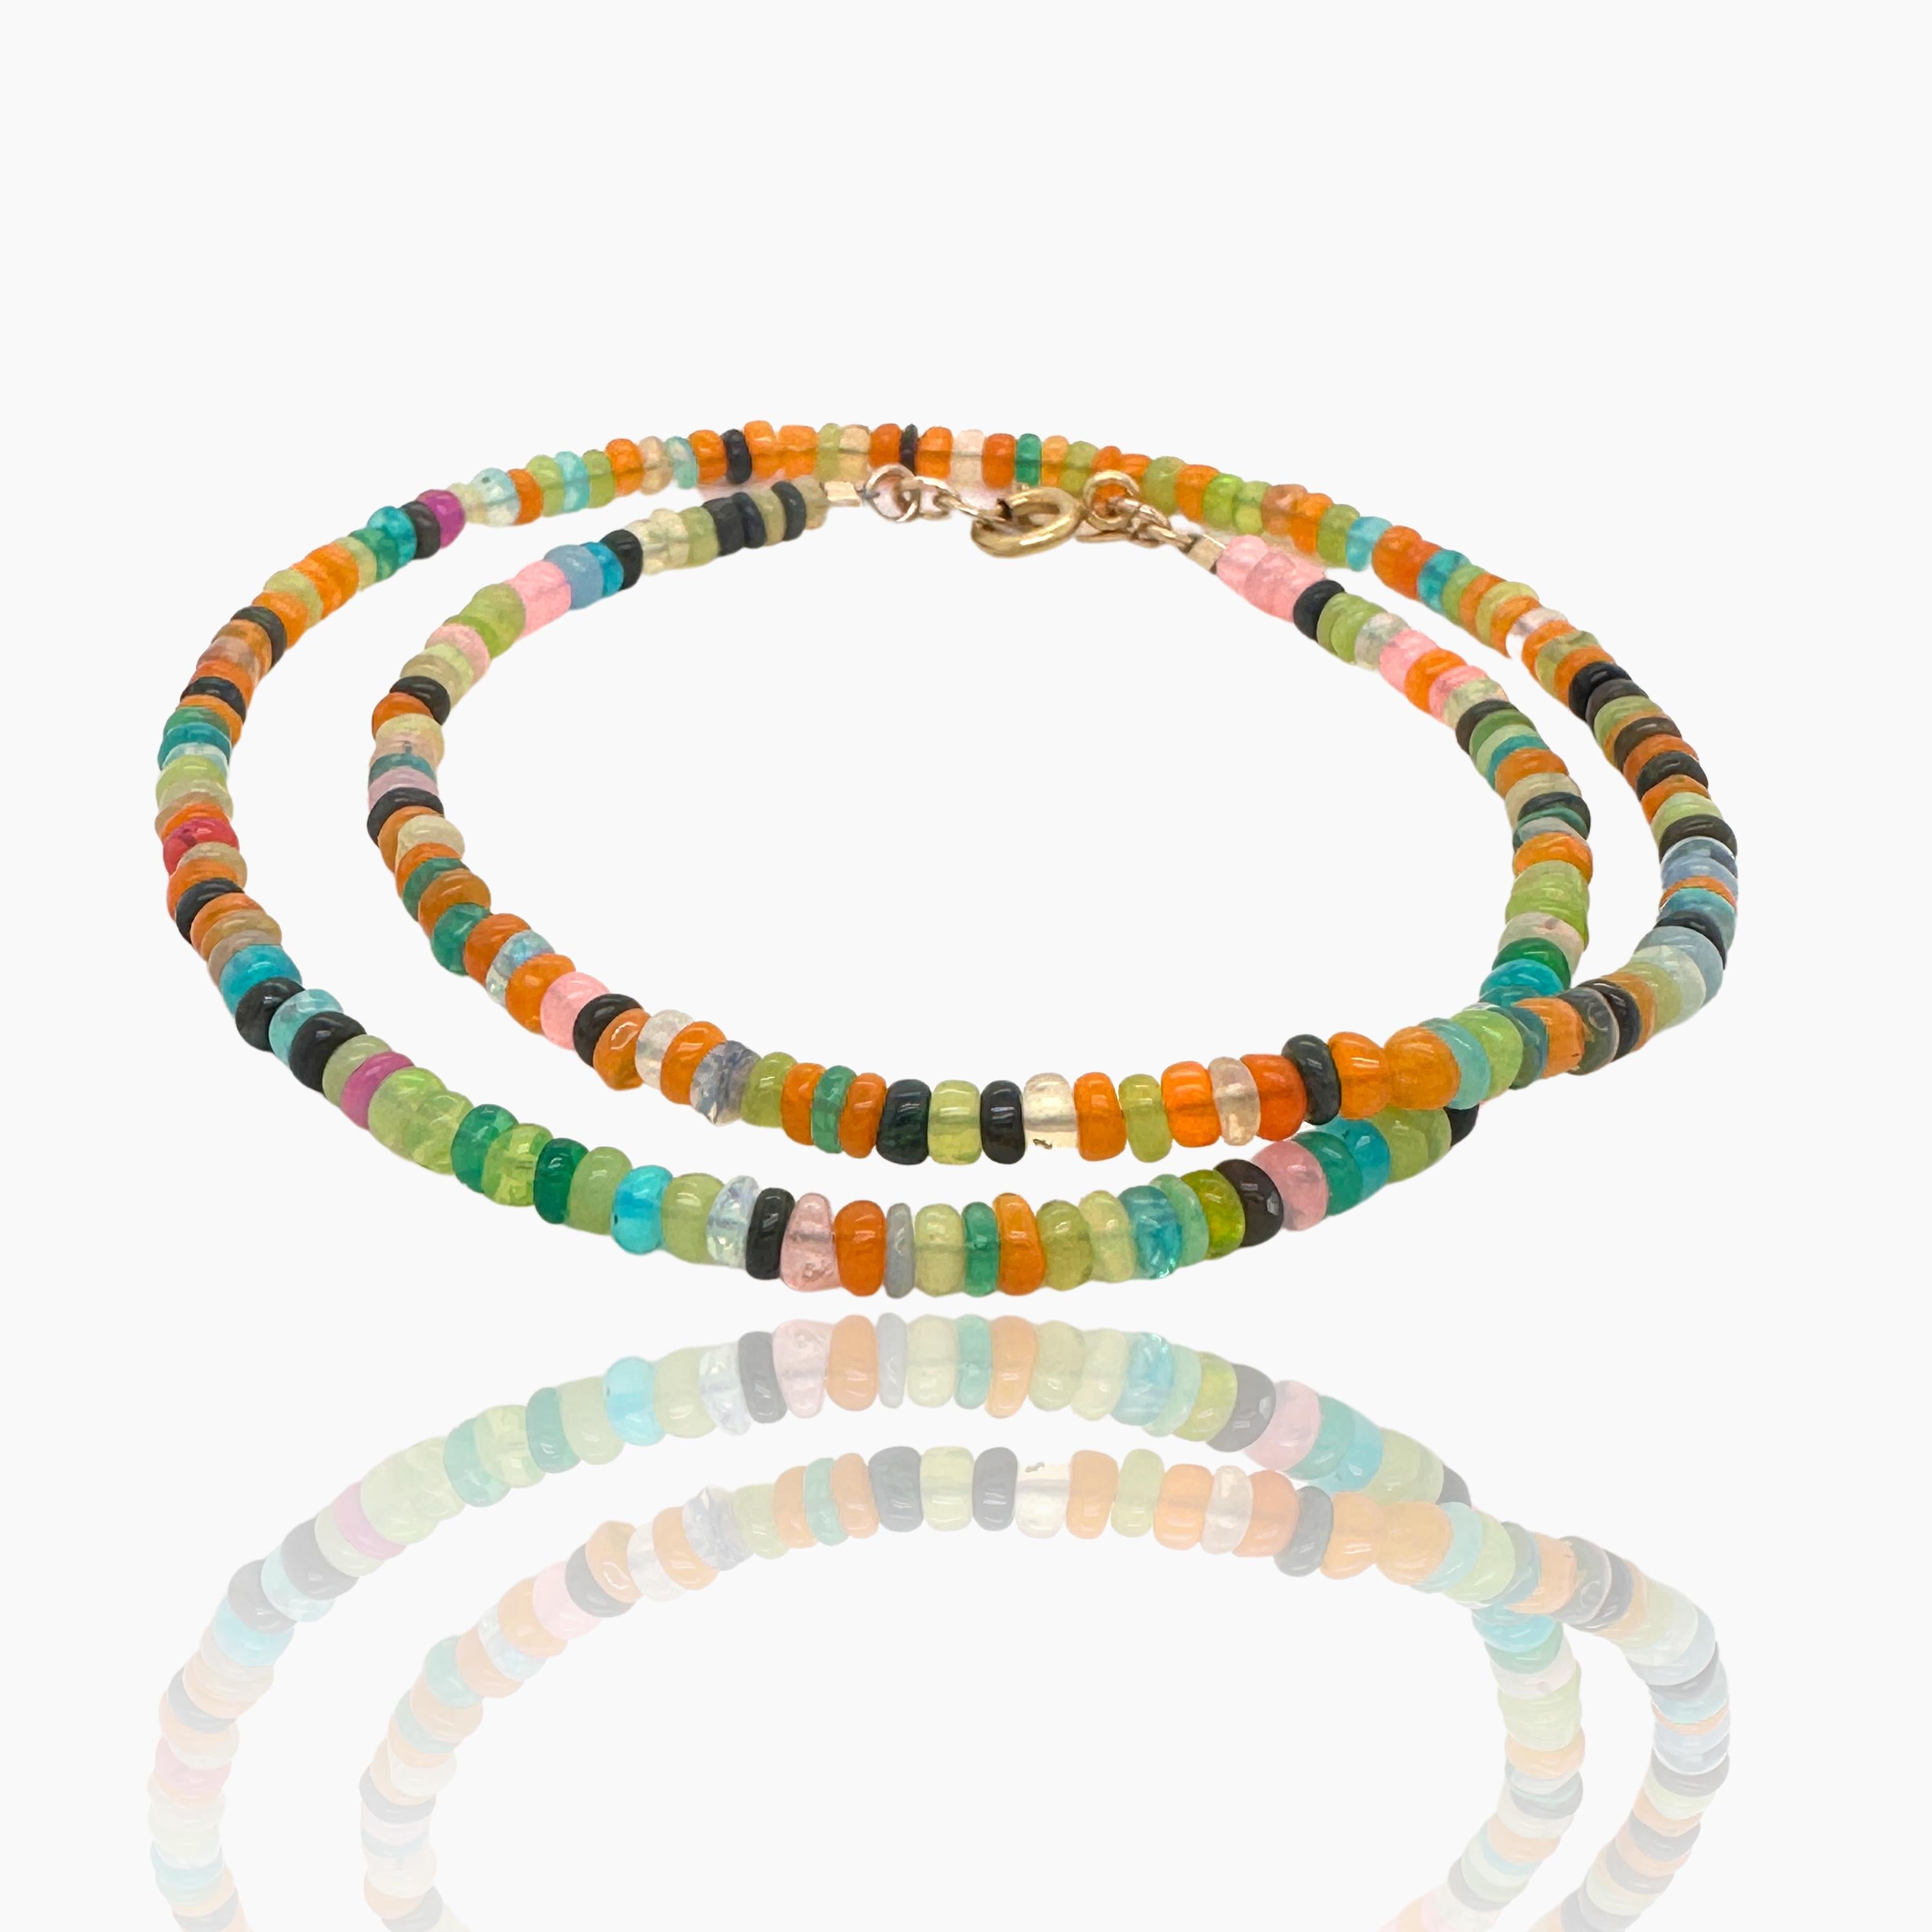 This Ethiopian Opal Necklace features a rainbow of colors that make it a stunning option. It is popular for stacking and comes with a 14K gold fill spring ring clasp for a secure fit.  Opals are ~ 3mm each.

Measures 16-1/2